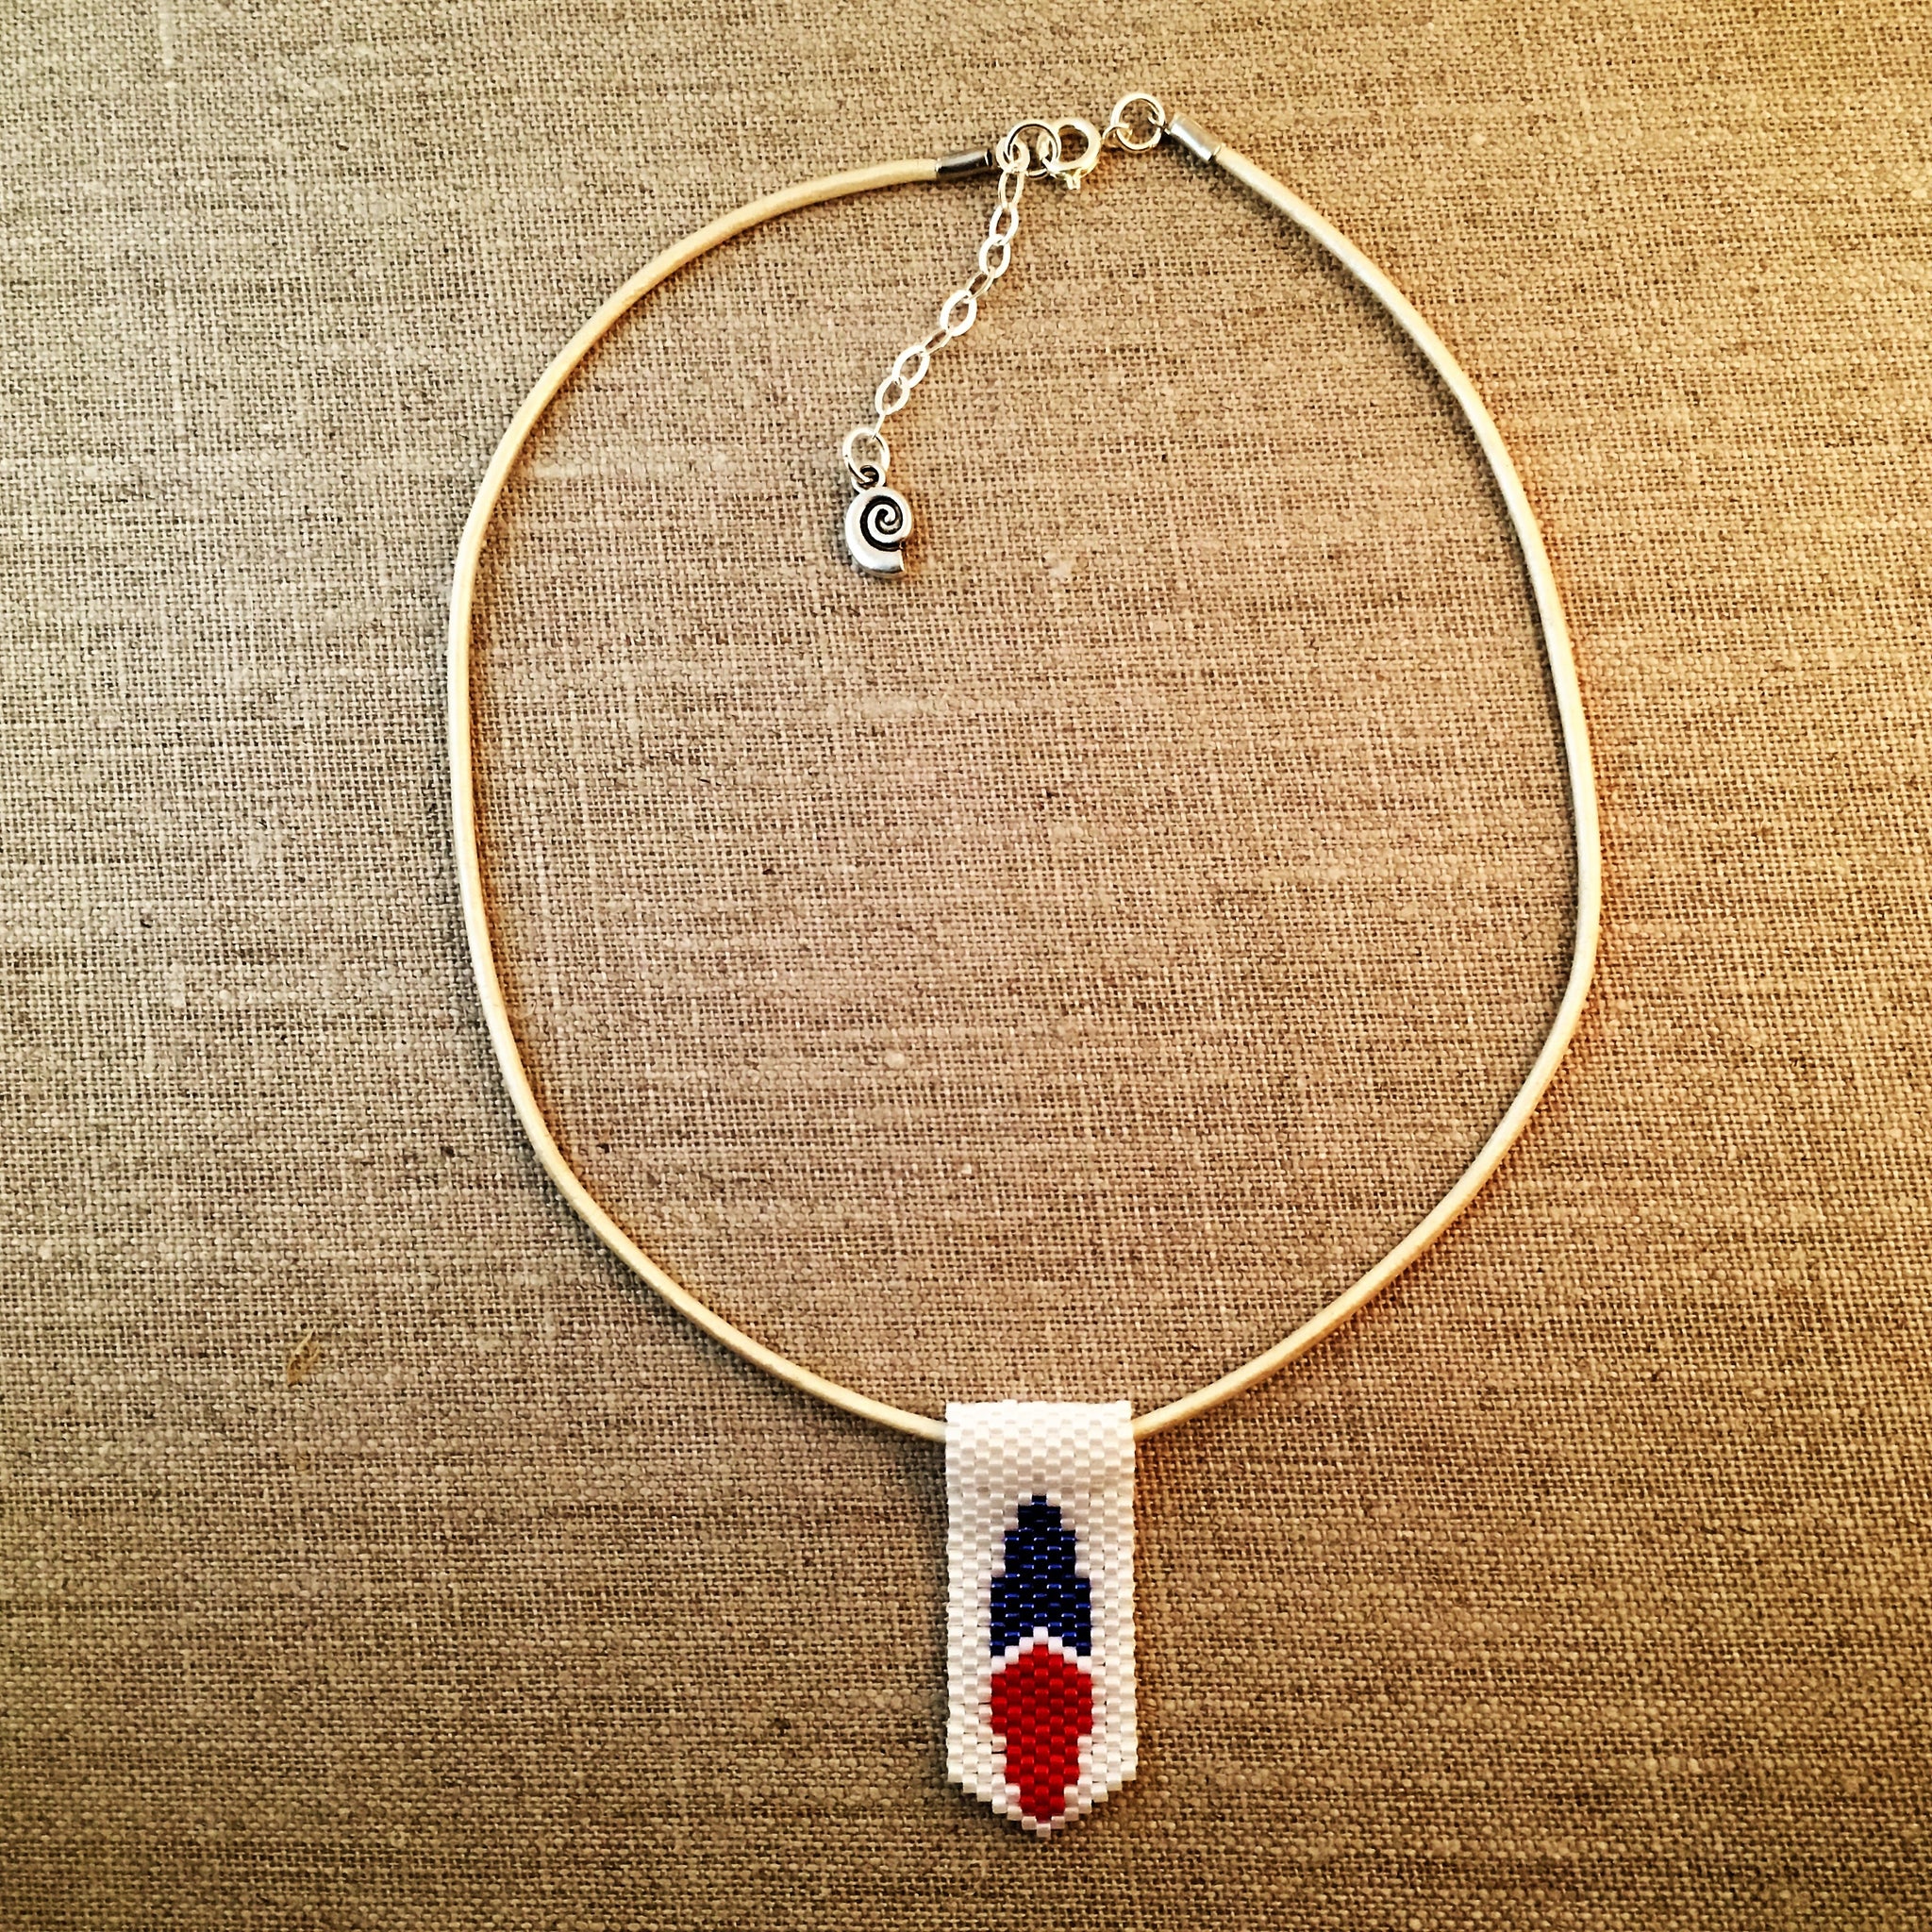 Mini Surfboard Pendant Necklace in Red, Blue and White